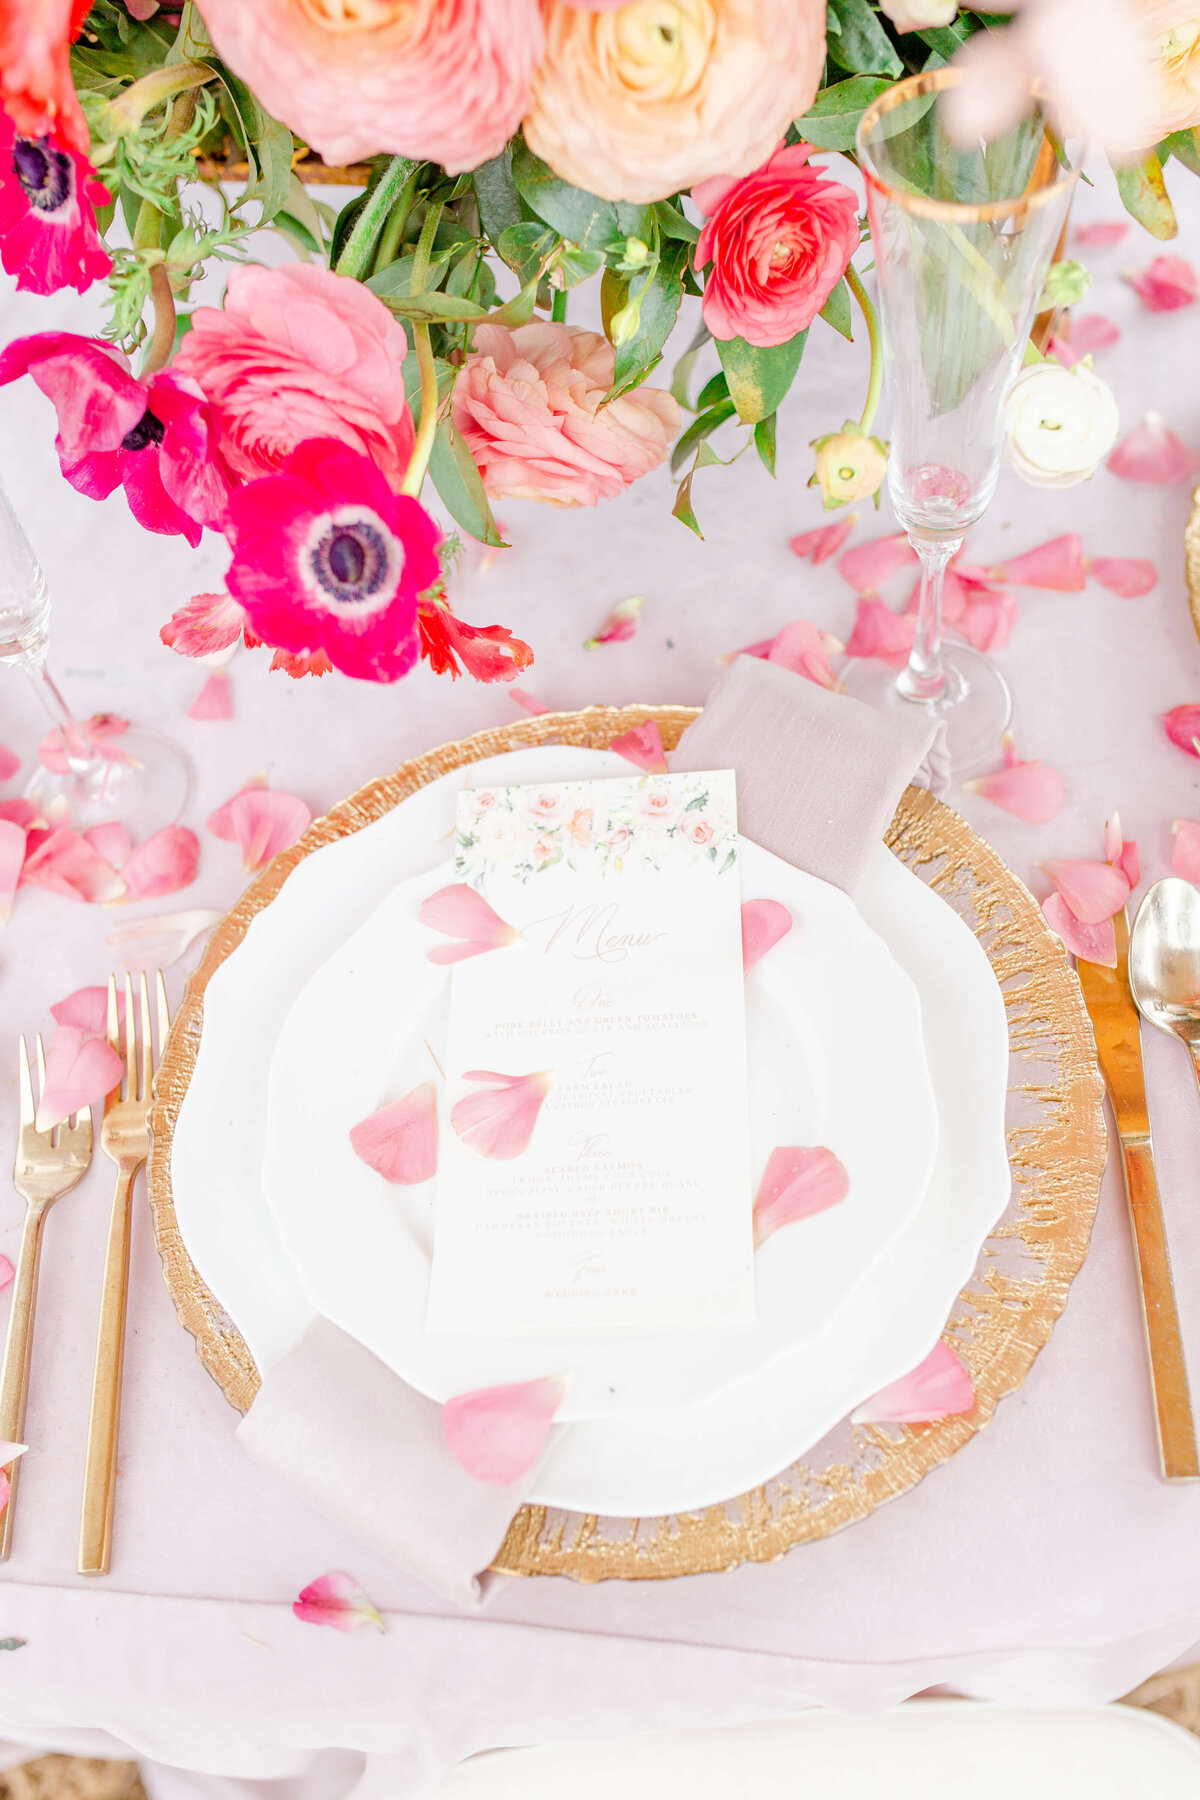 Wedding-Tablescape-shot-by-Bethany-Lane-Photography2